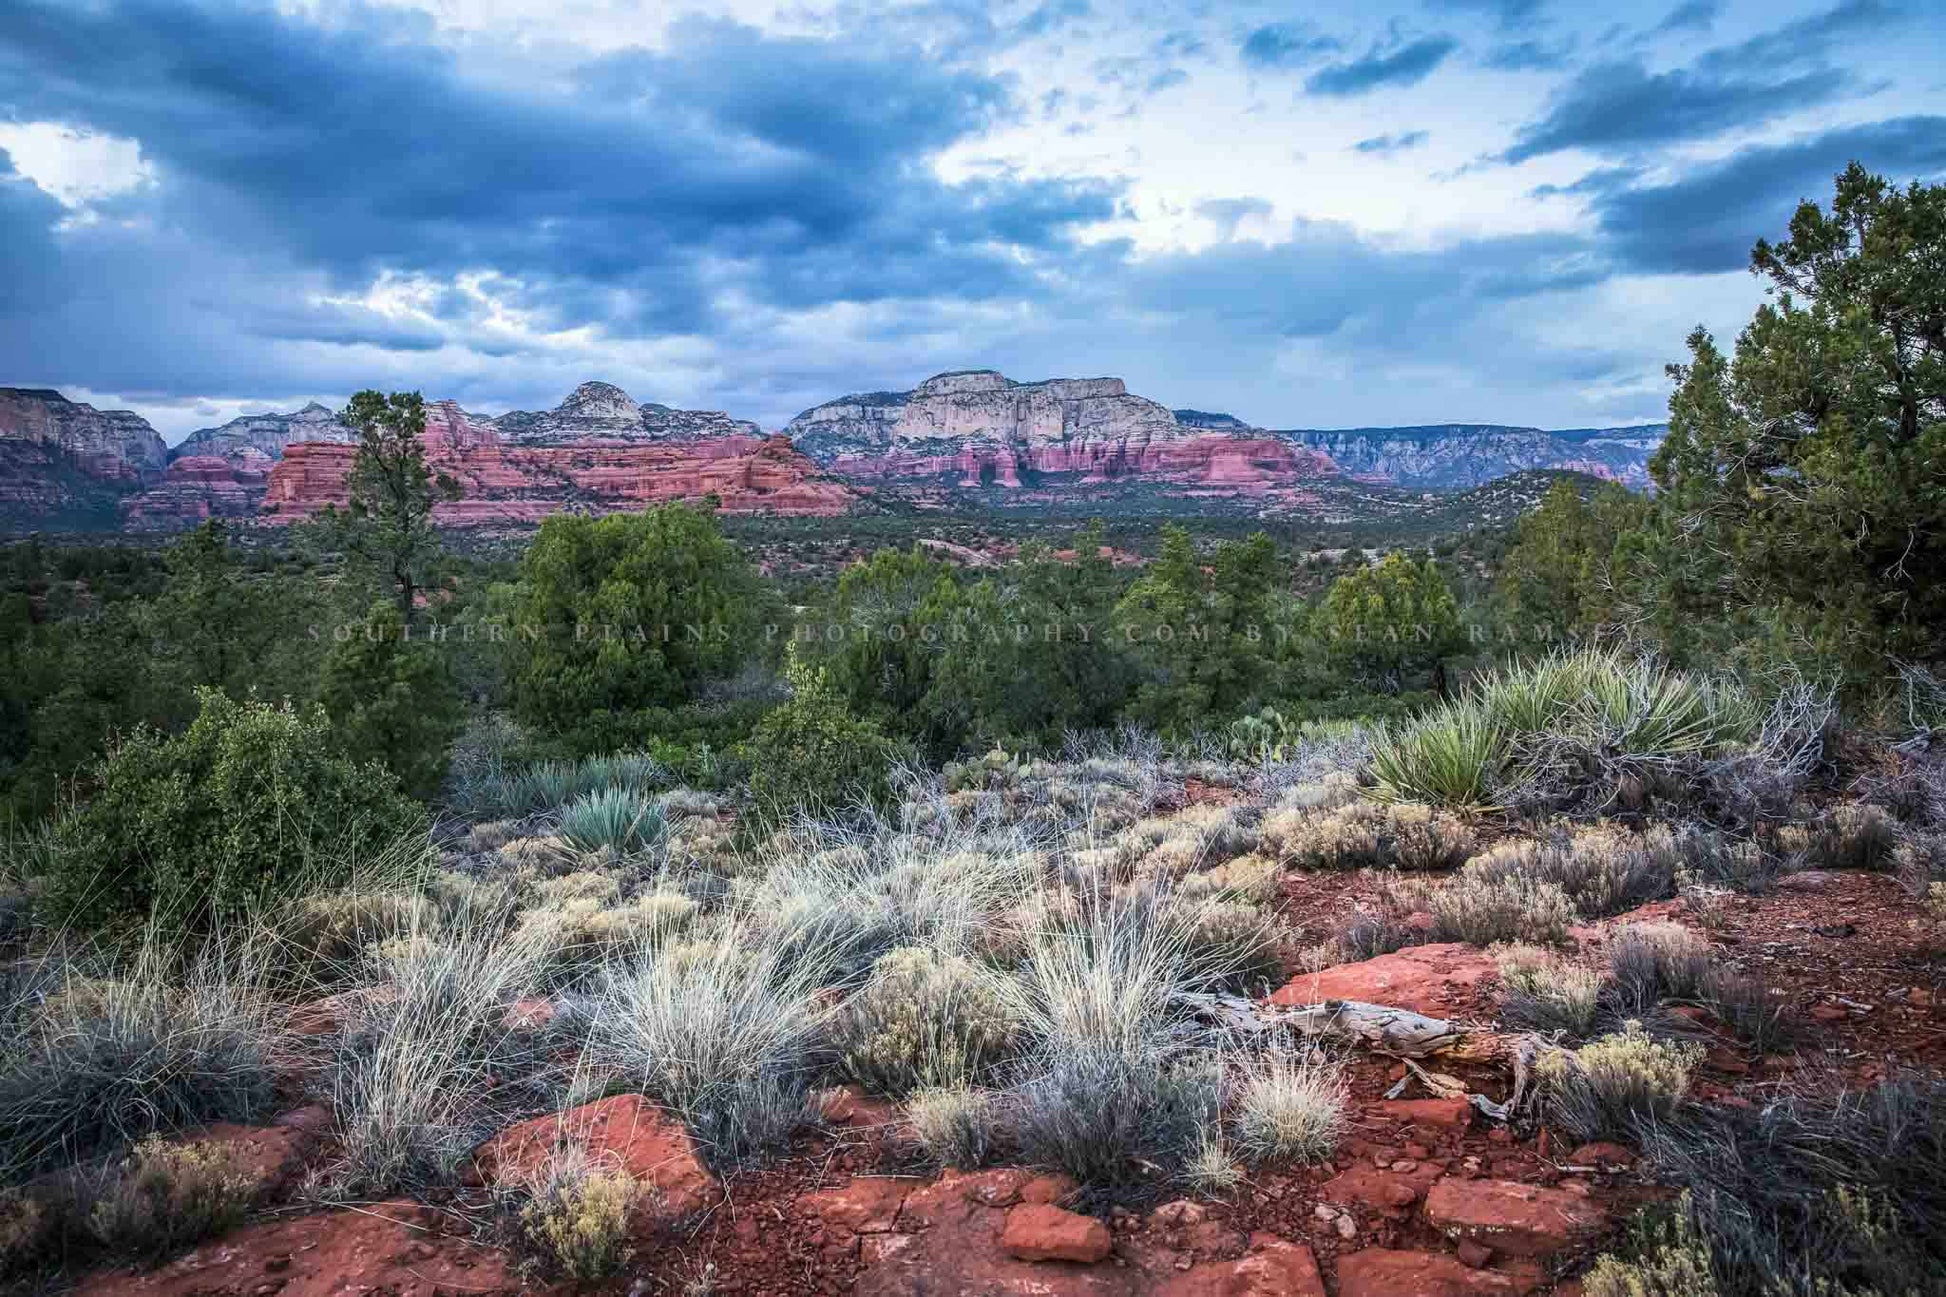 Desert southwest landscape photography print of red rocks and cool vibes on a chilly spring evening near Sedona, Arizona by Sean Ramsey of Southern Plains Photography.